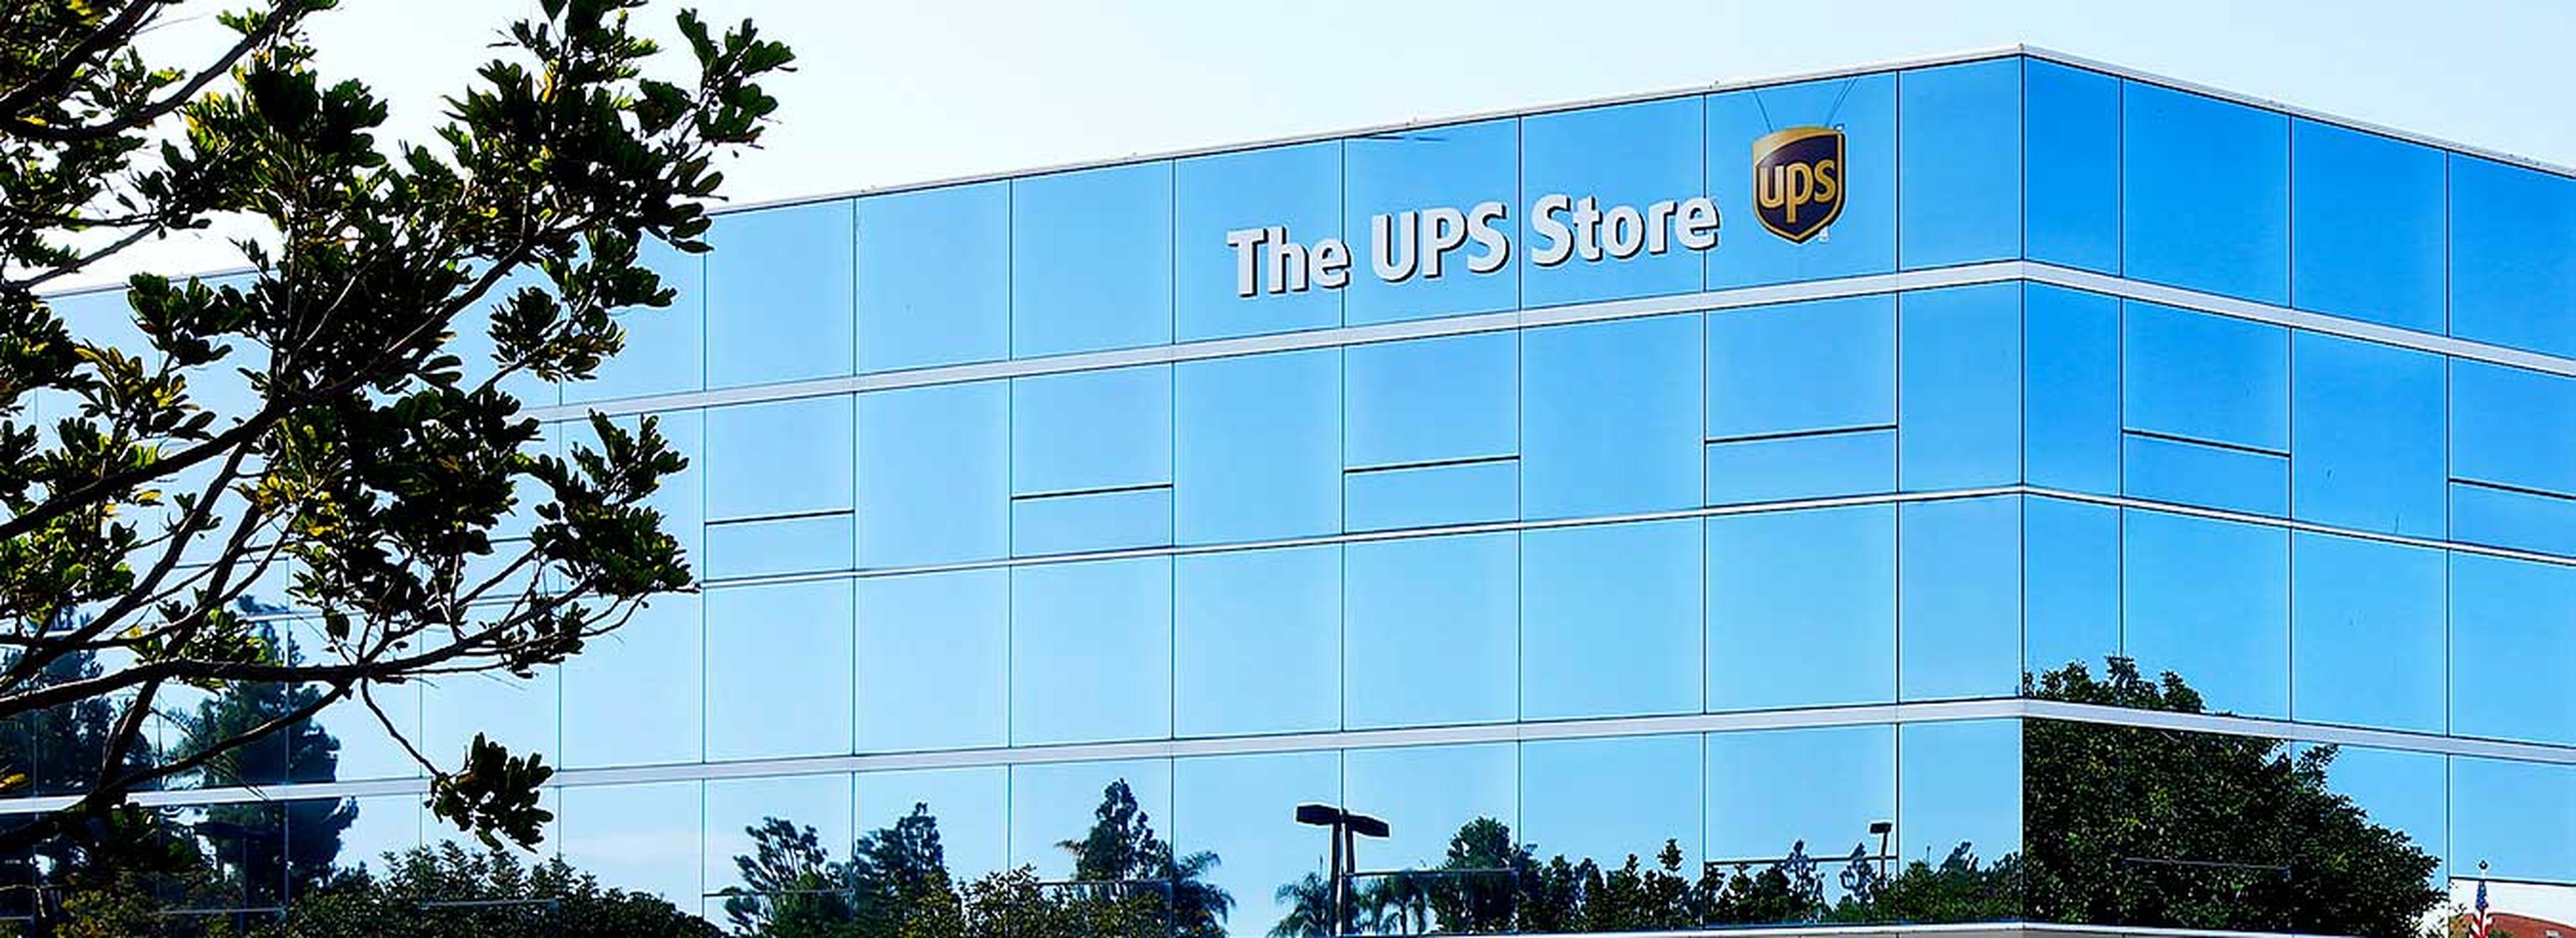 The UPS store